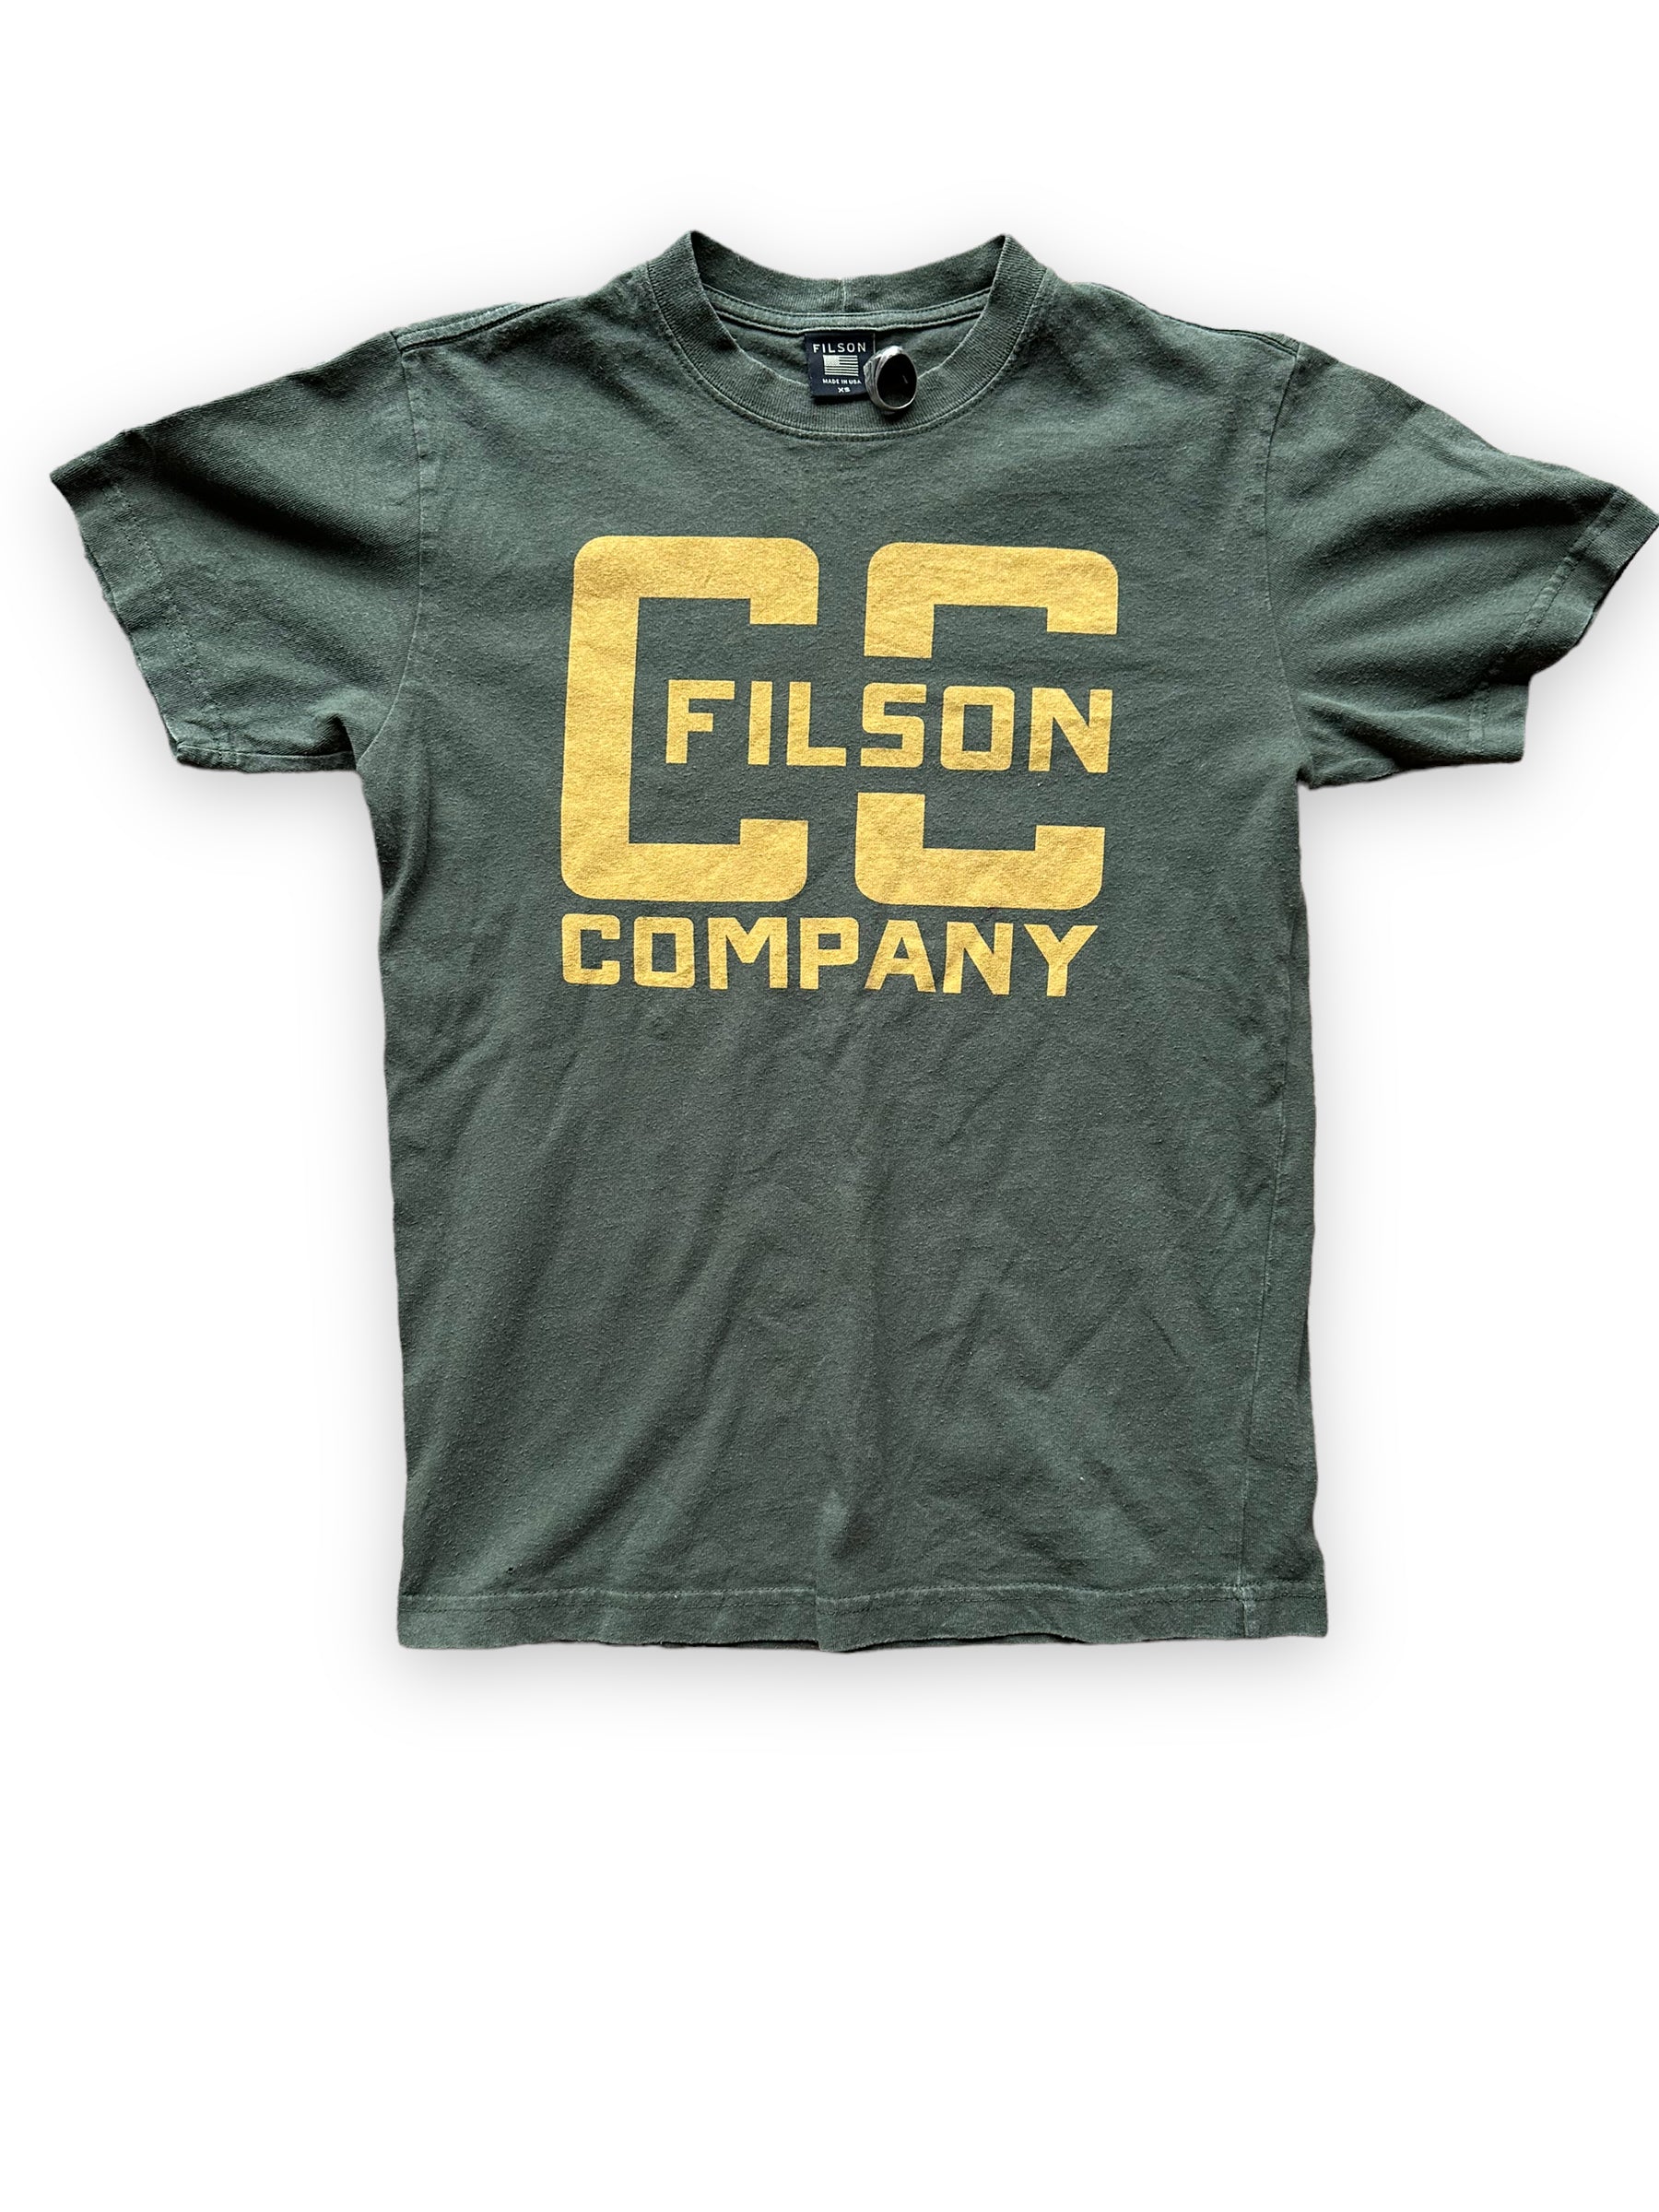 Front View of Olive Green Filson Cotton Tee SZ XS  |  Barn Owl Vintage Goods | Filson Graphic Tees Seattle